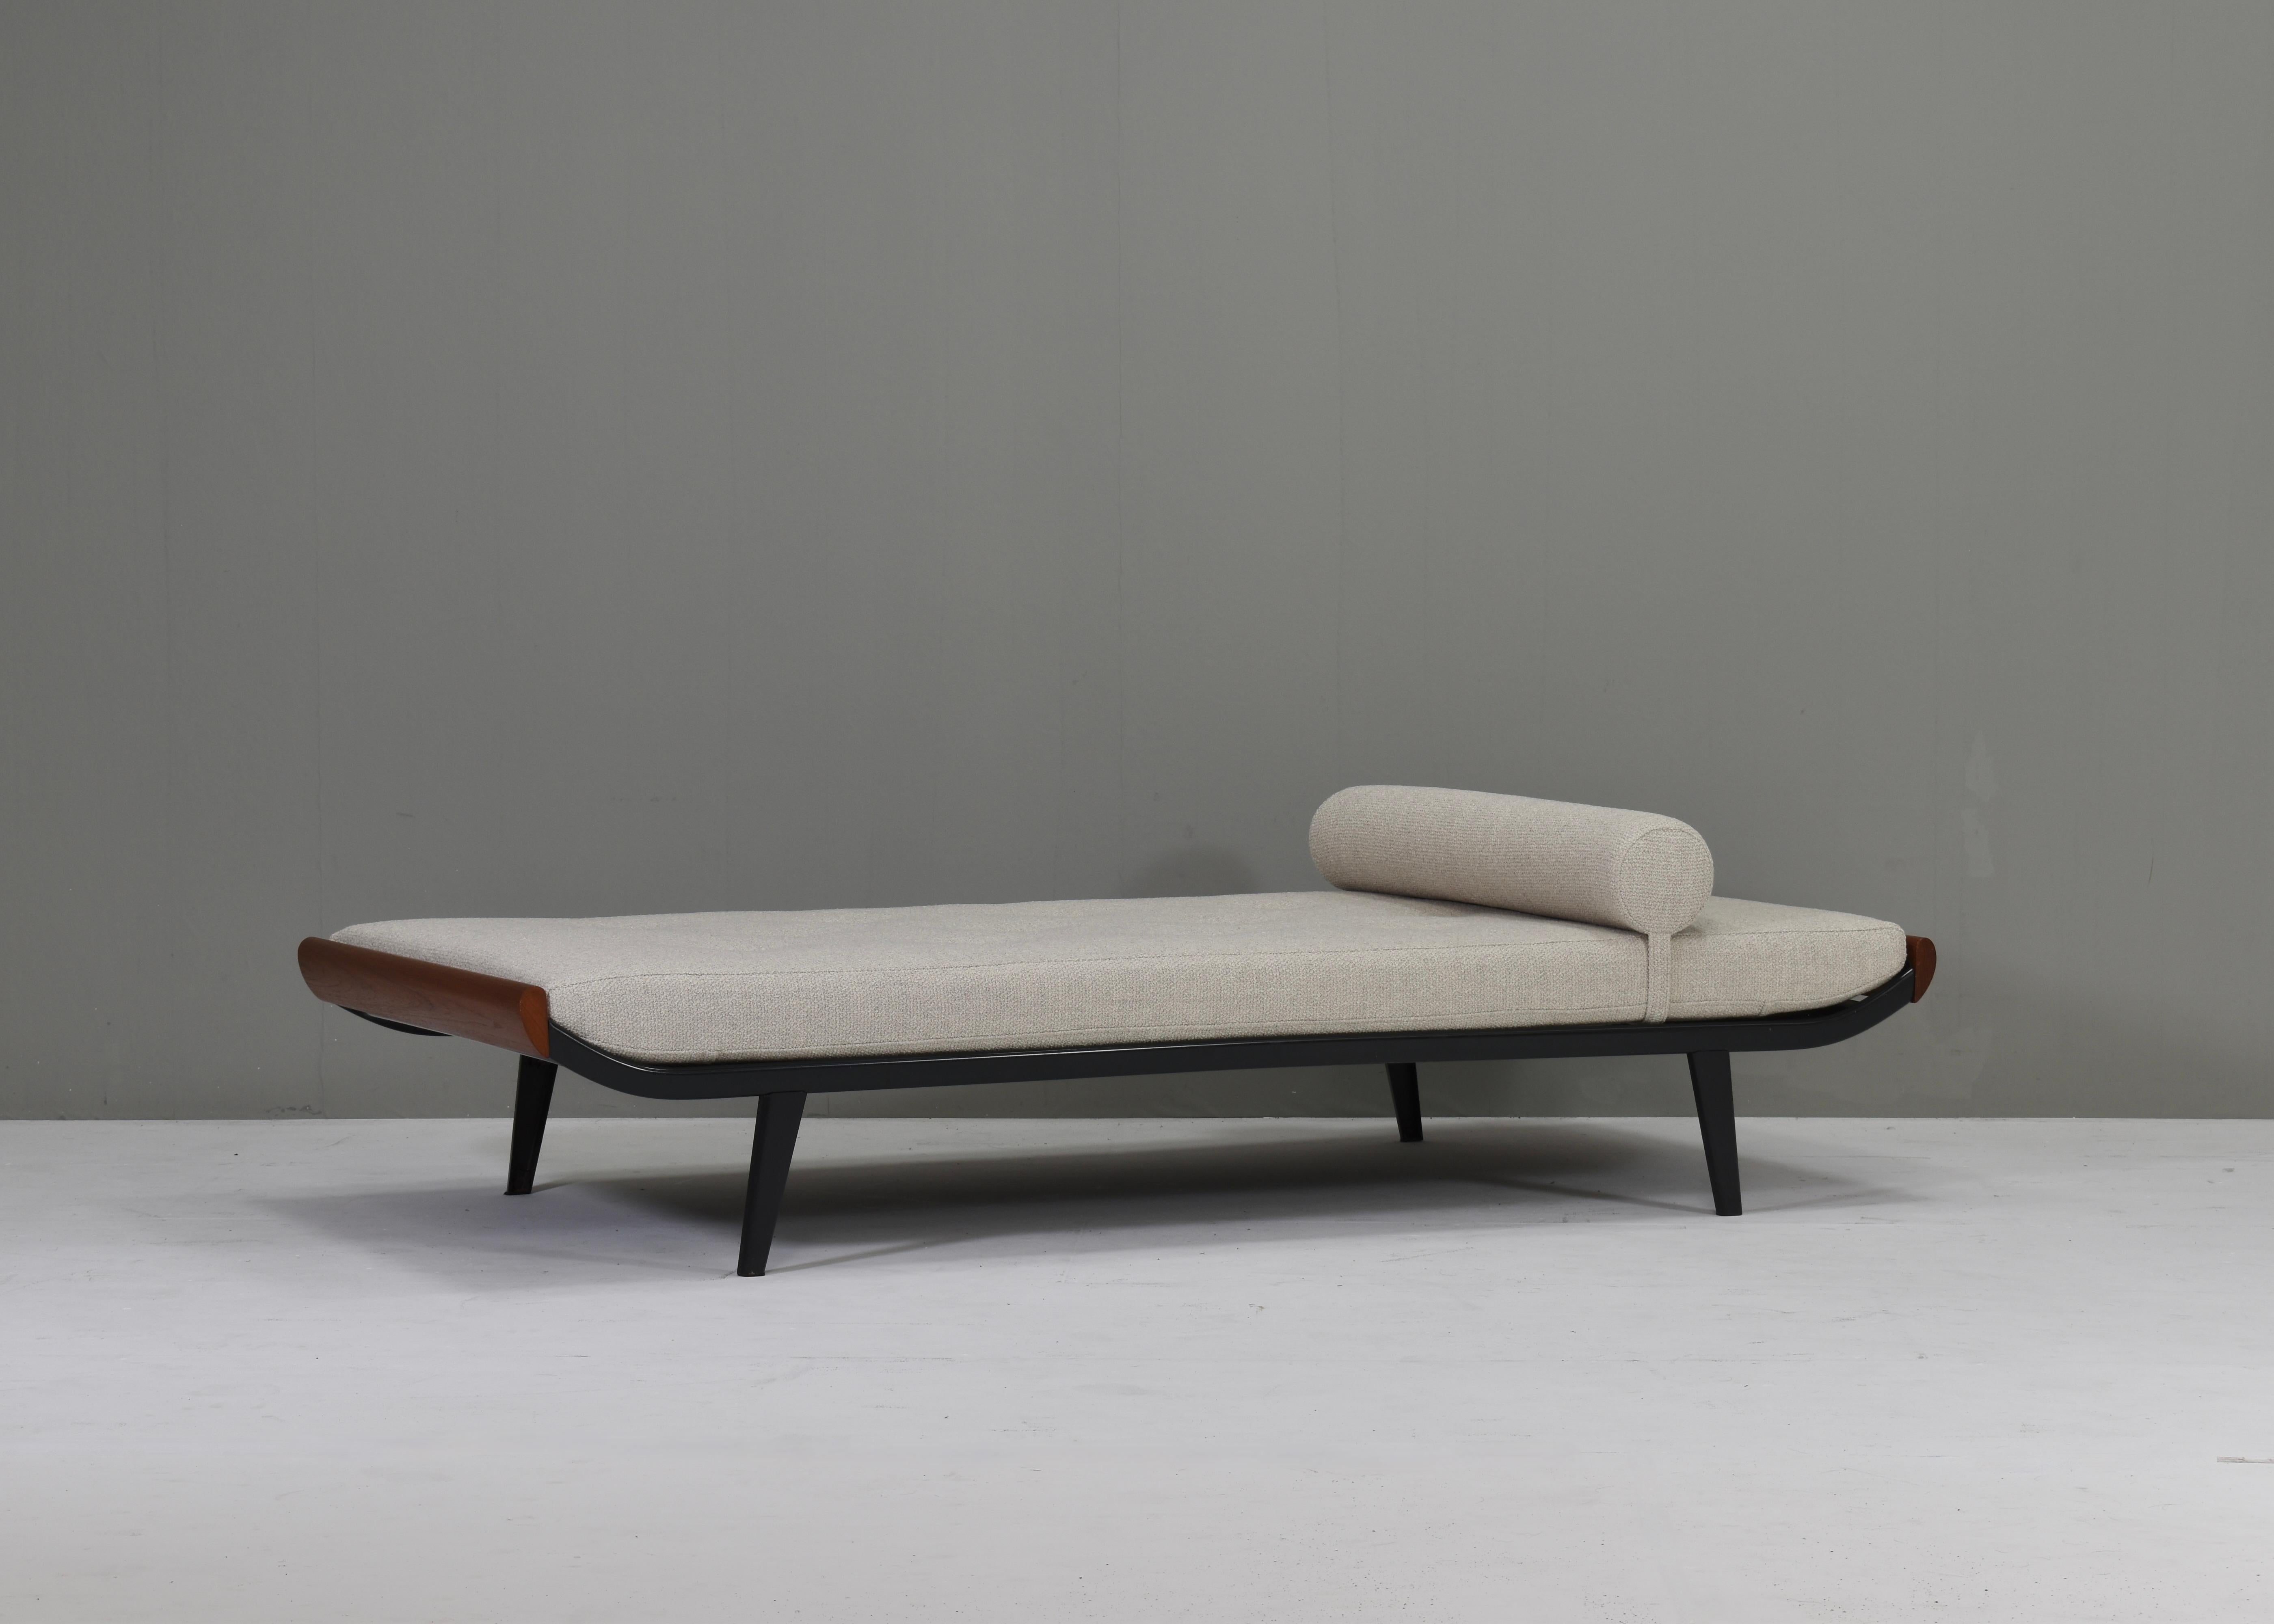 New upholstered daybed by Dick Cordemeijer for Auping, Netherlands – 1953.
The Cleopatra daybed has a new mattress and bouclé beige creme fabric by De Ploegstof model Monza.
In good condition with new mattress and upholstery. The metal frame shows